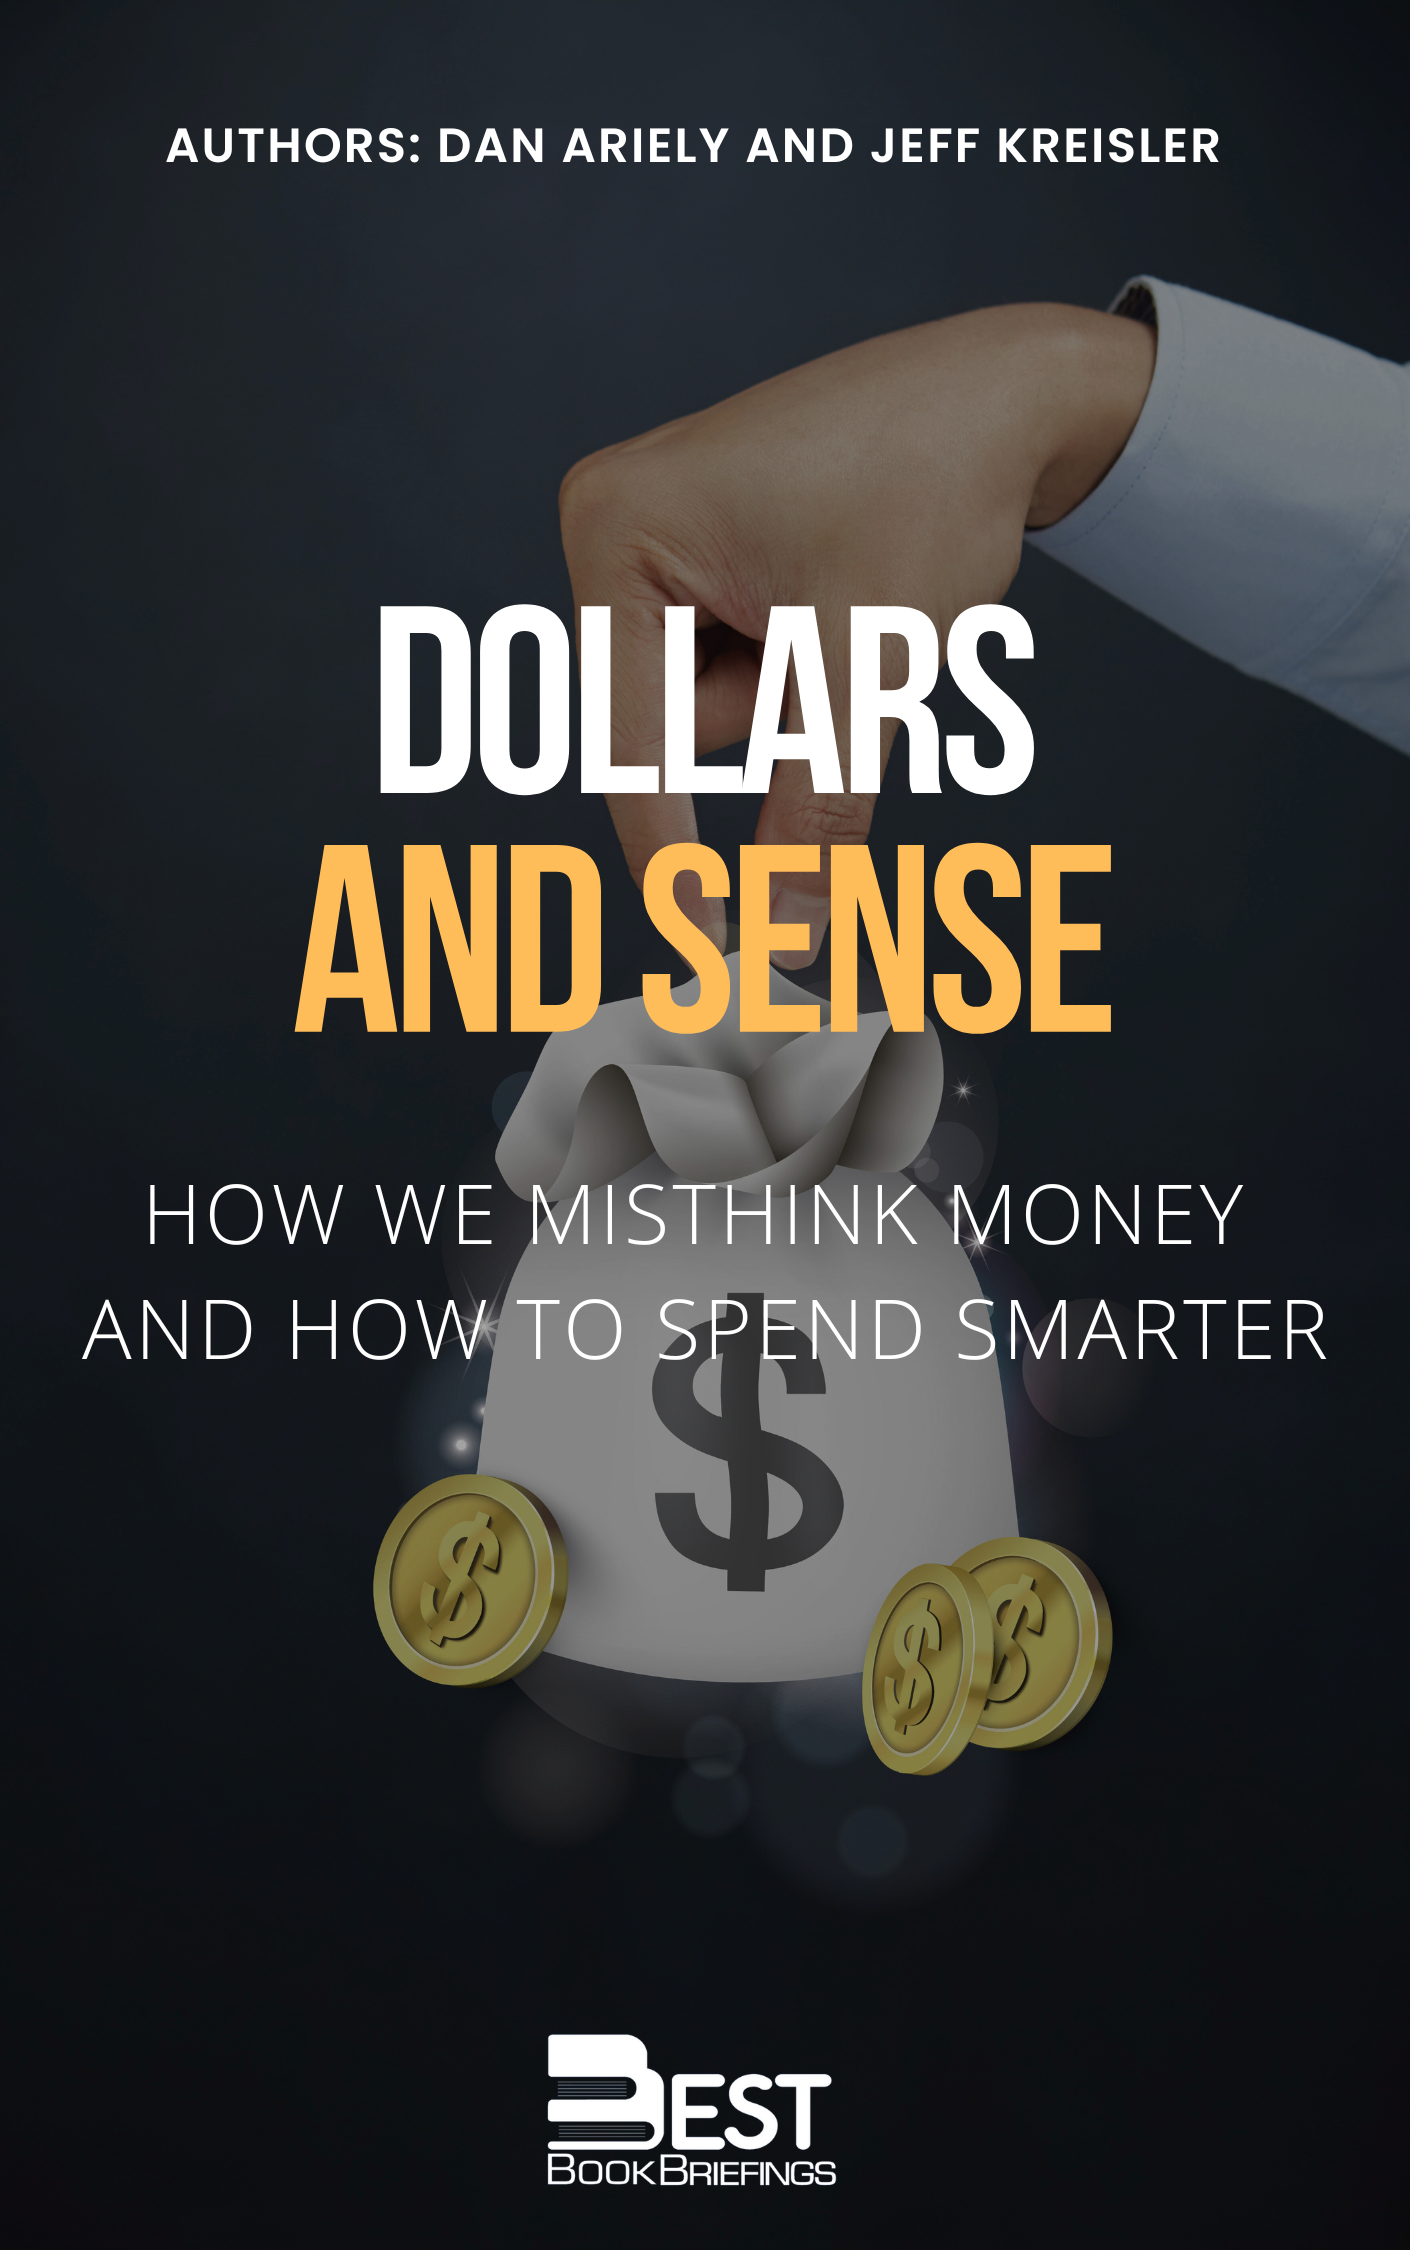 We think of money as numbers, values, and amounts, but when it comes down to it, when we actually use our money, we engage our hearts more than our heads. Emotions play a powerful role in shaping our financial behavior, often making us our own worst enemies as we try to 